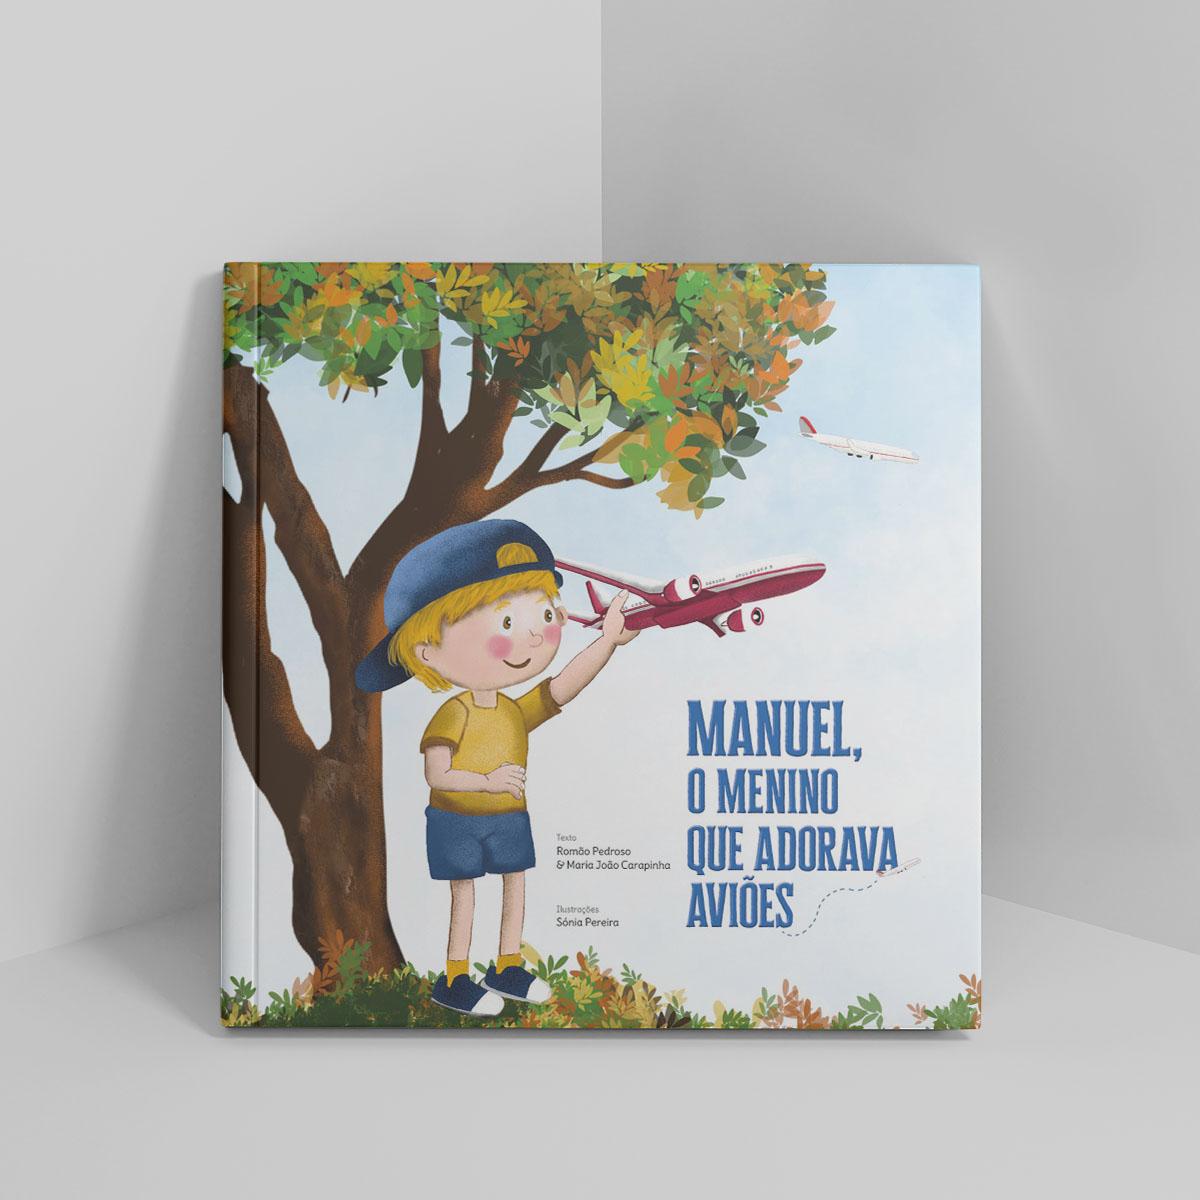 Illustration of the Children's Book "Manuel, the boy who loved planes"